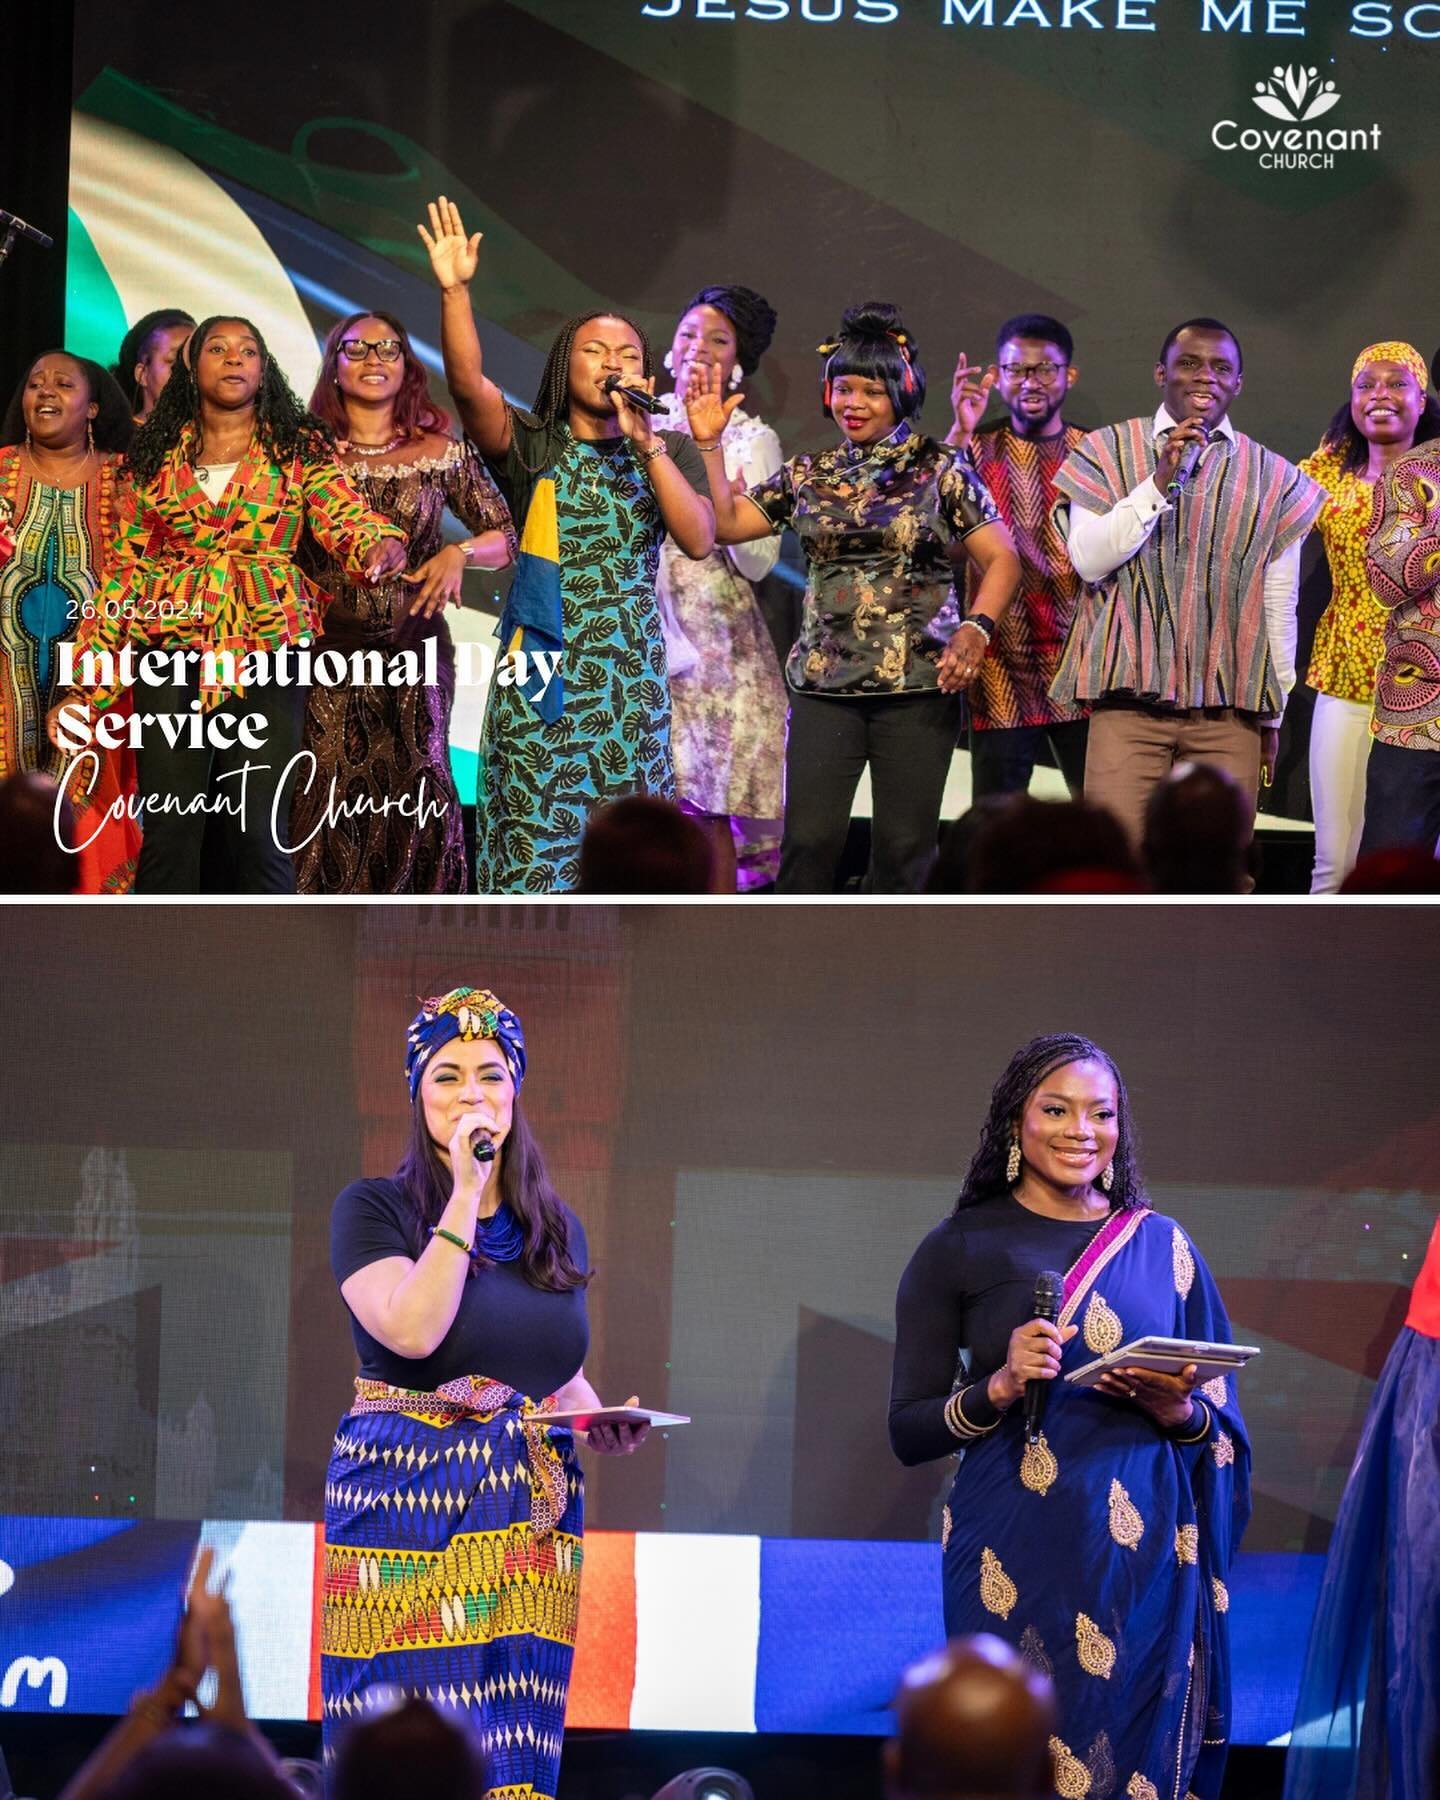 What a colourful International Sunday service! Can you spot yourself? 👀 Watch this space&hellip;still more snaps to come! 💫
.
#sunday #sundayfunday #internationalday #church #churchfamily #worldwide #international #family #photos #sundayvibes #sout